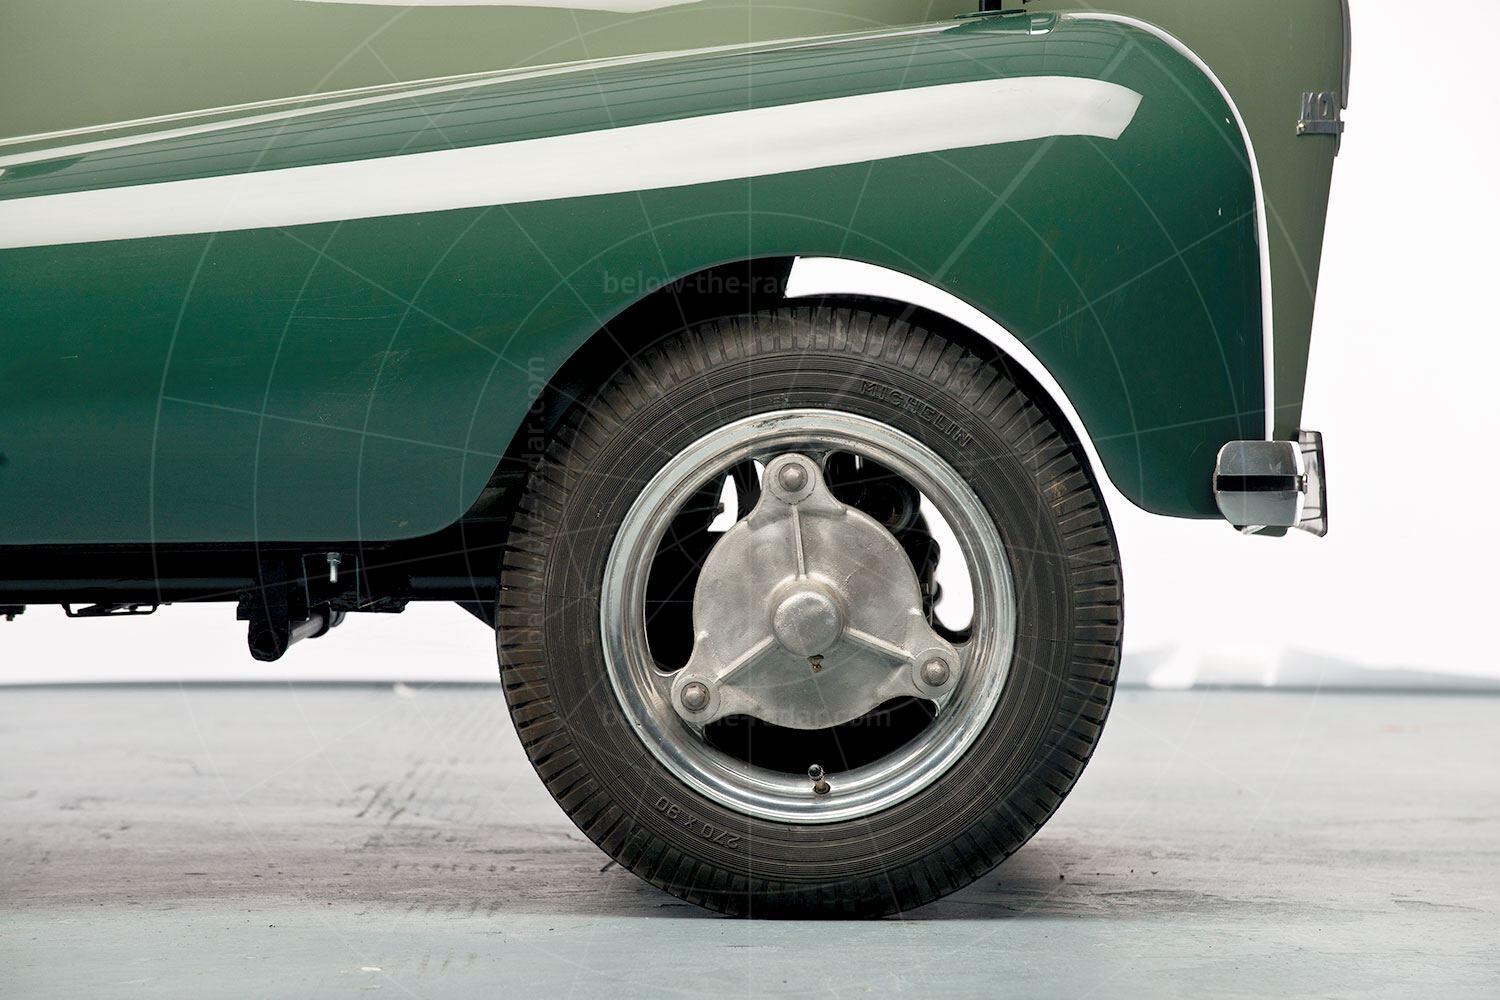 SIL Kover front wheel Pic: RM Sotheby's | SIL Kover front wheel